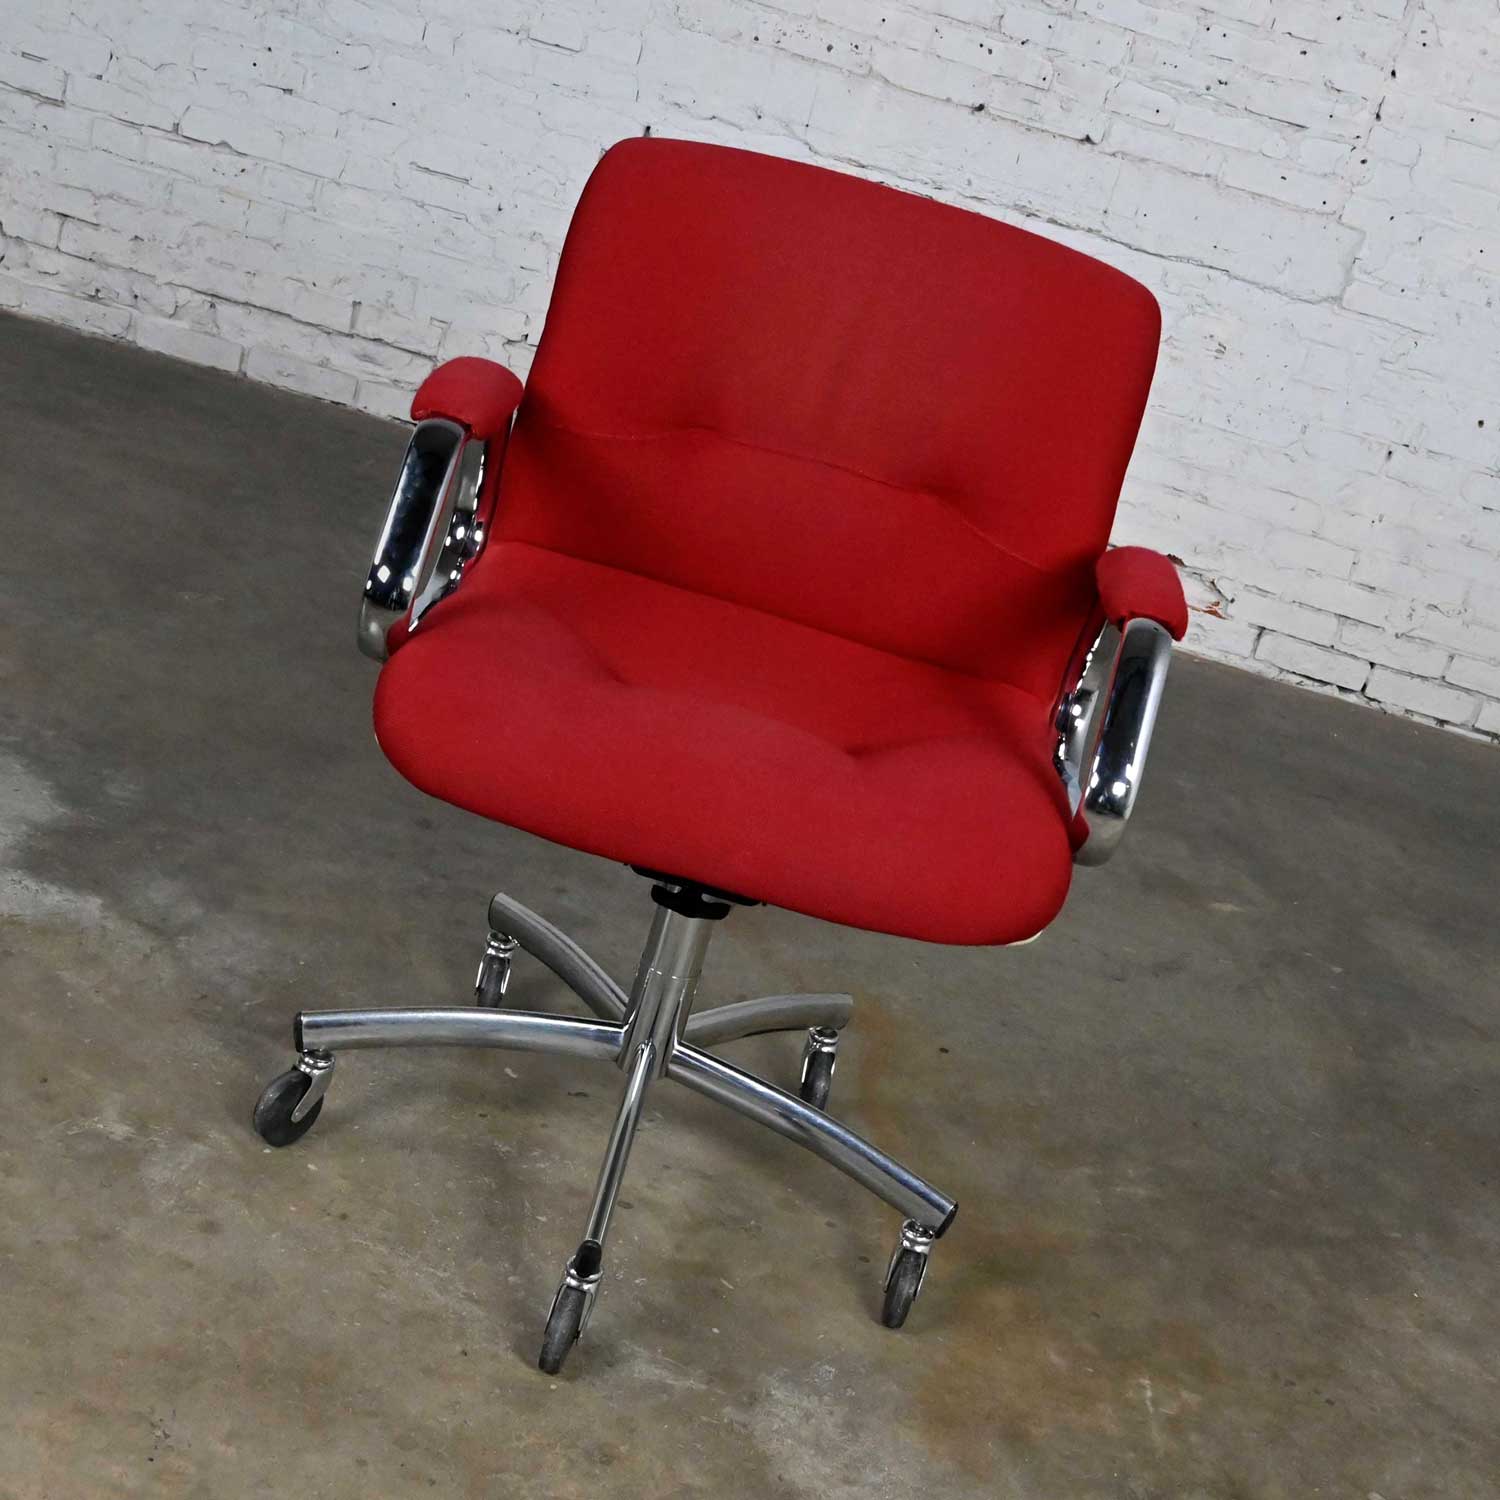 Vintage Modern Steelcase Chrome & Red Swivel Rolling Chair #454 Style Charles Pollock